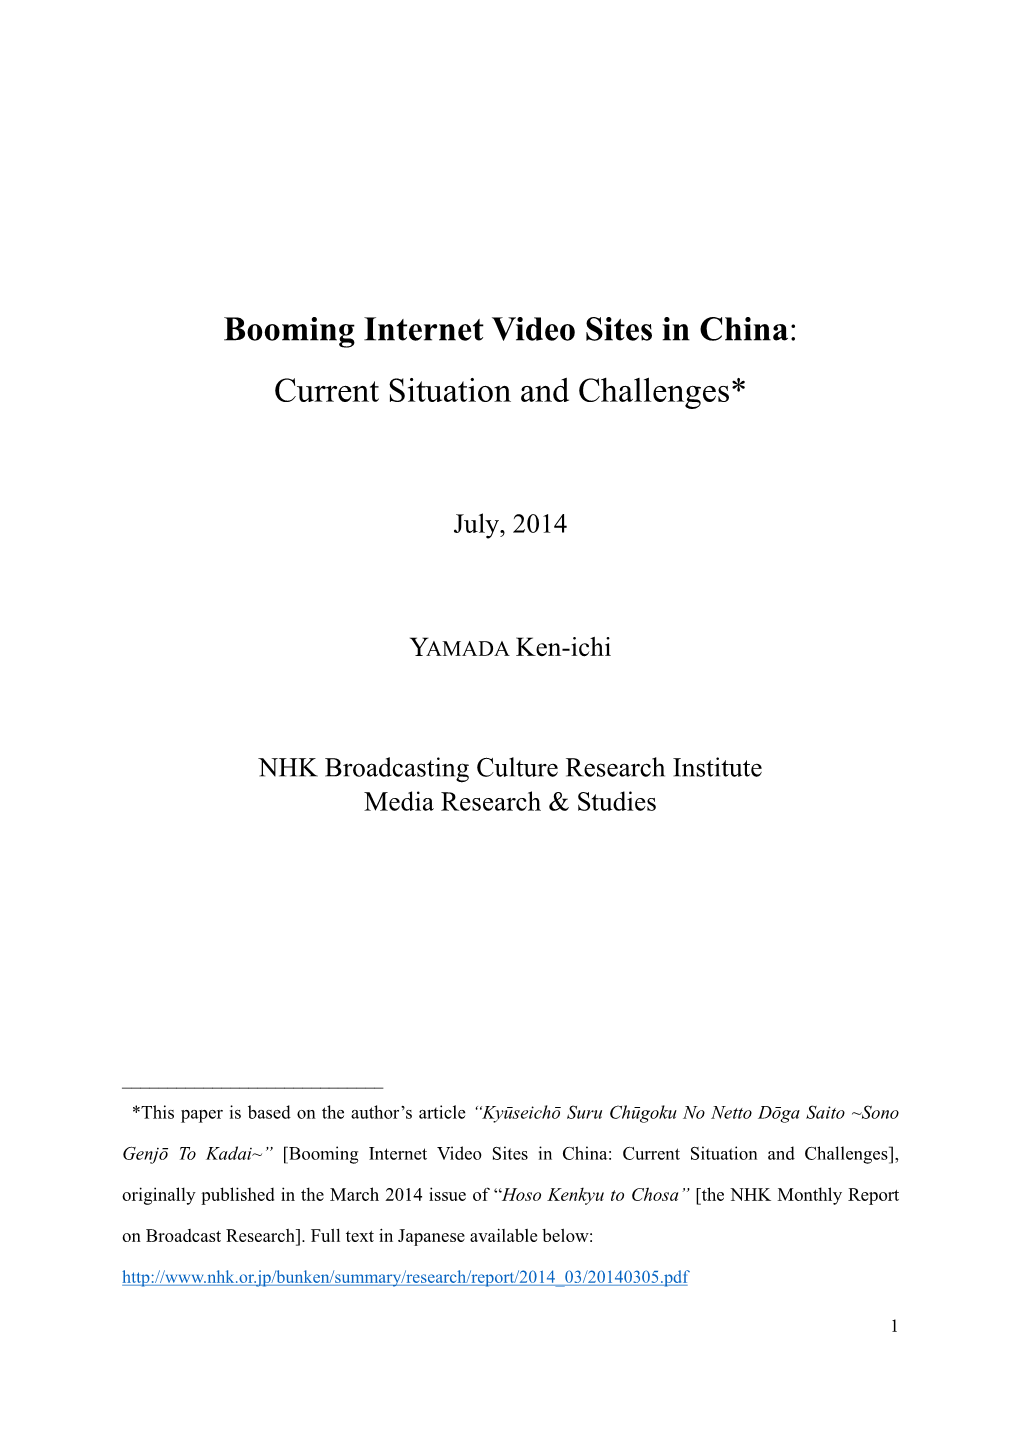 Booming Internet Video Sites in China: Current Situation and Challenges*